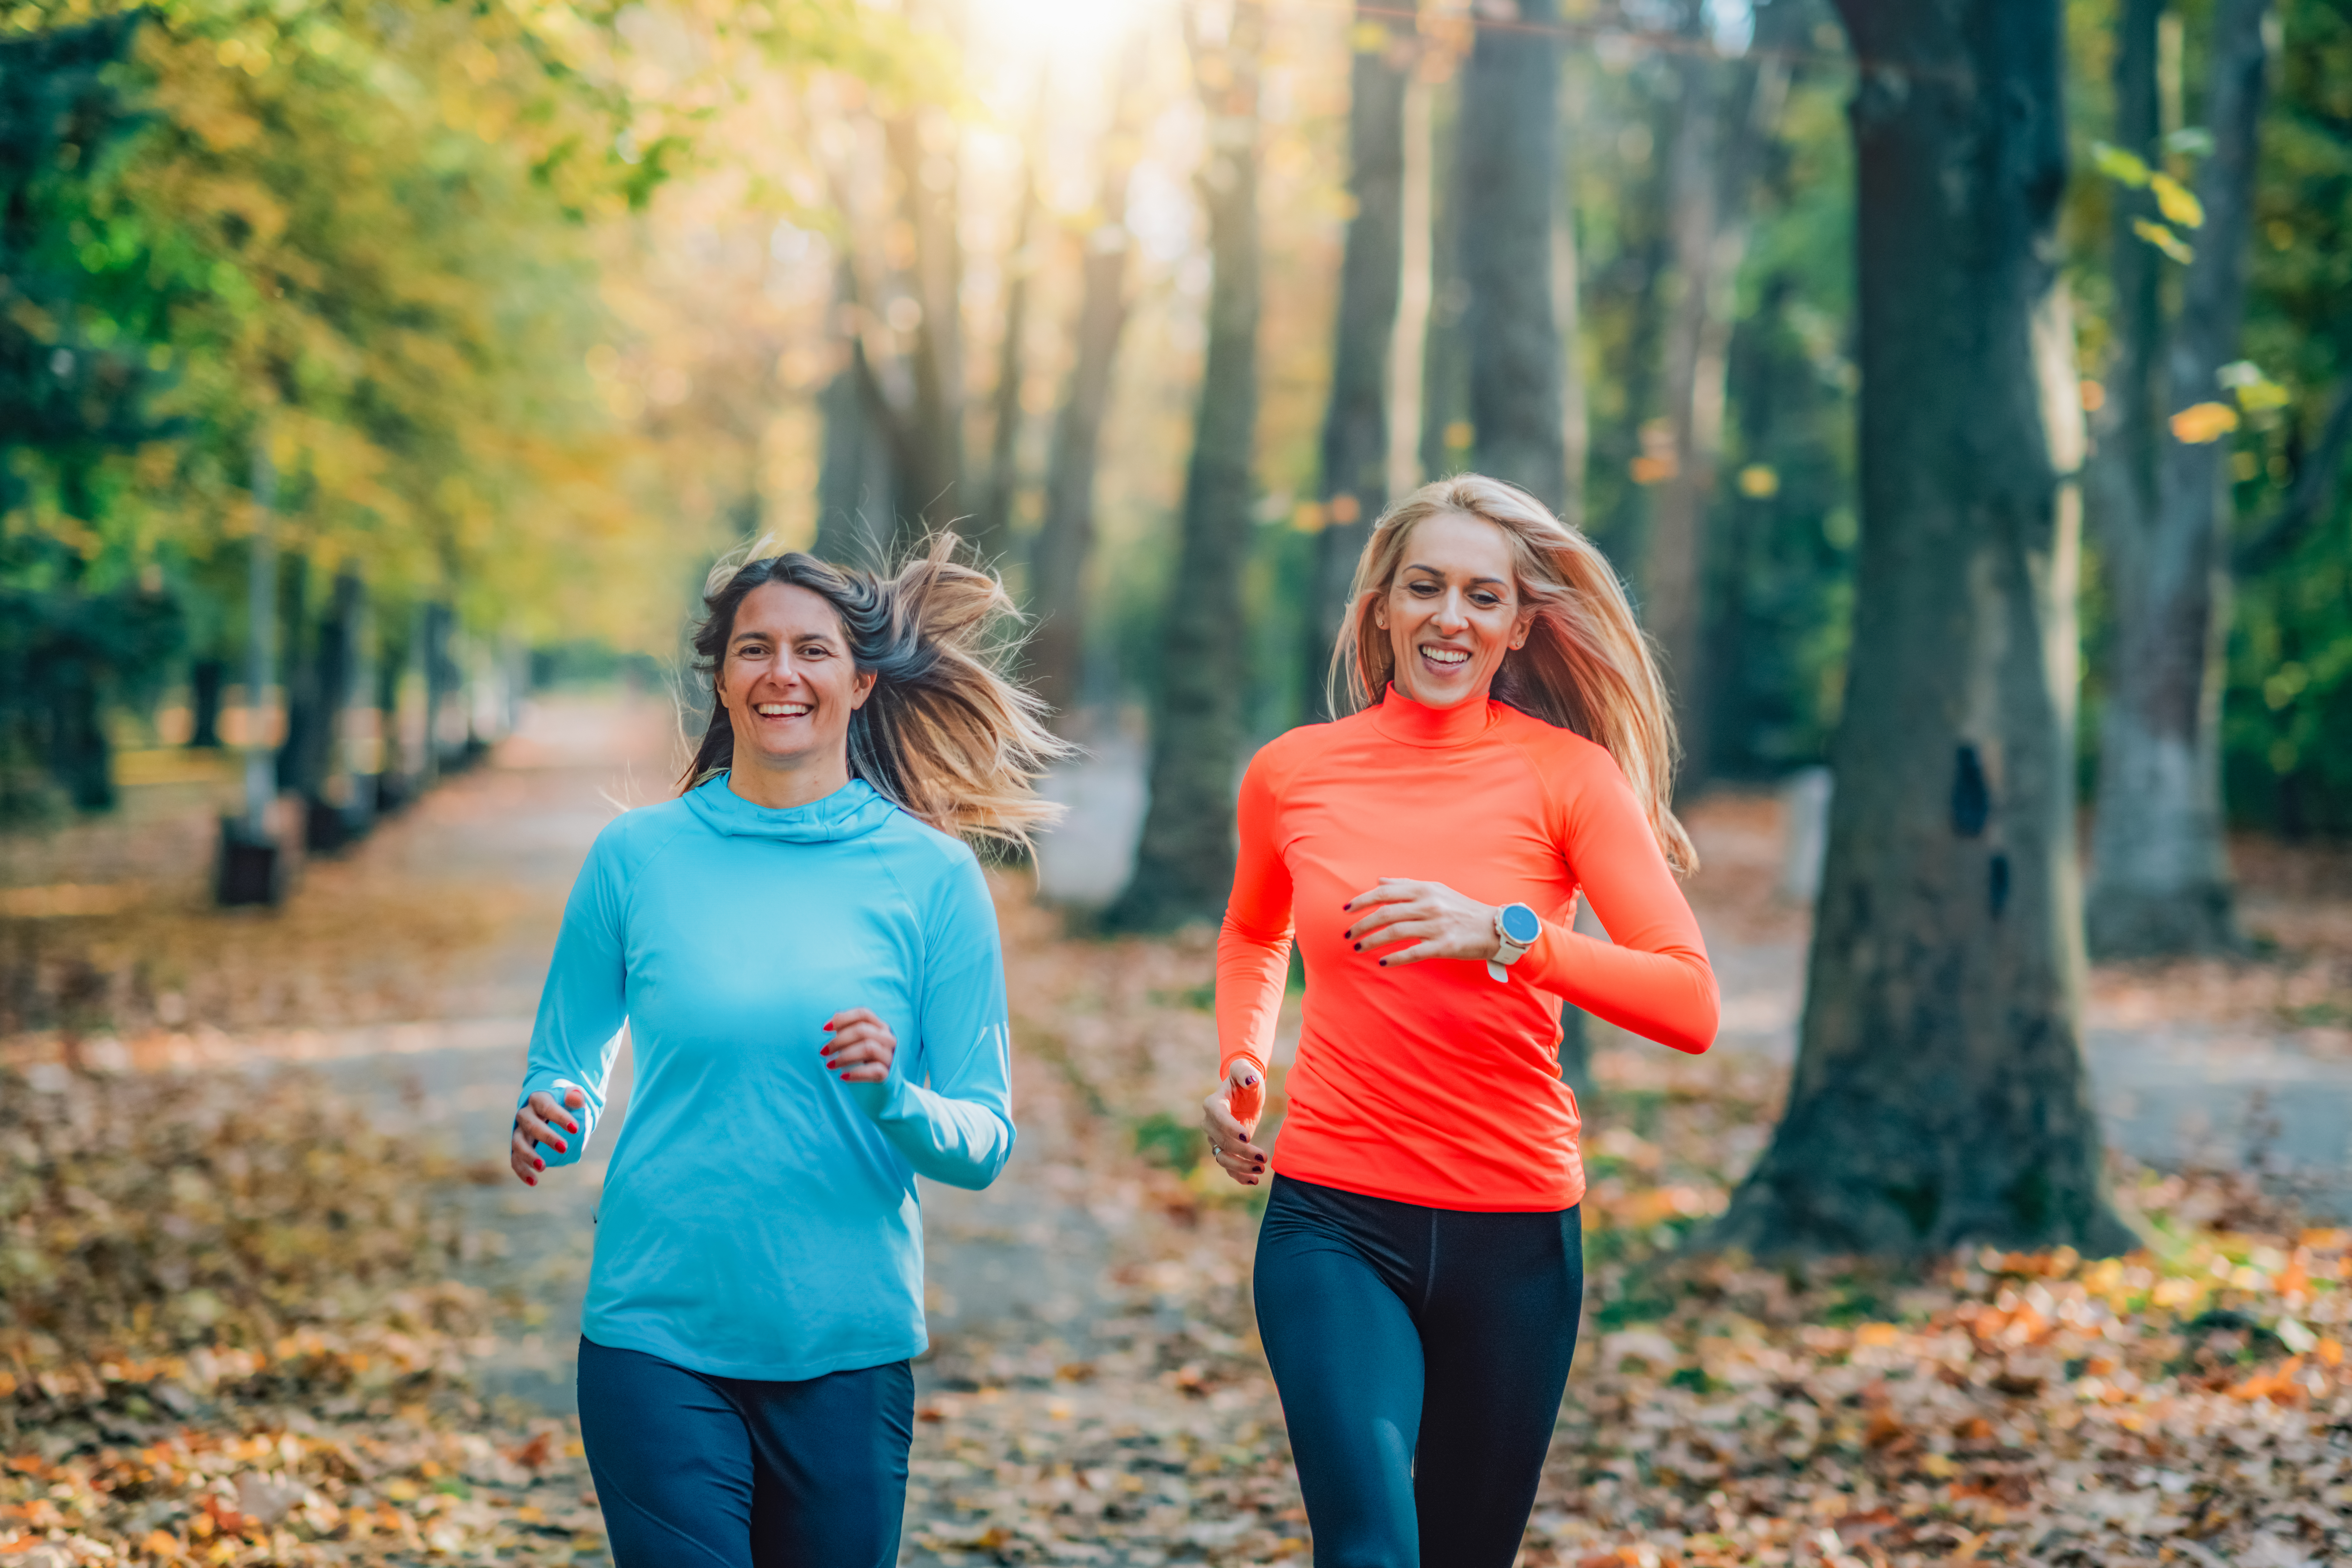 Two smiling women jogging in a park, representing the positive impact of physical activity on mental health.